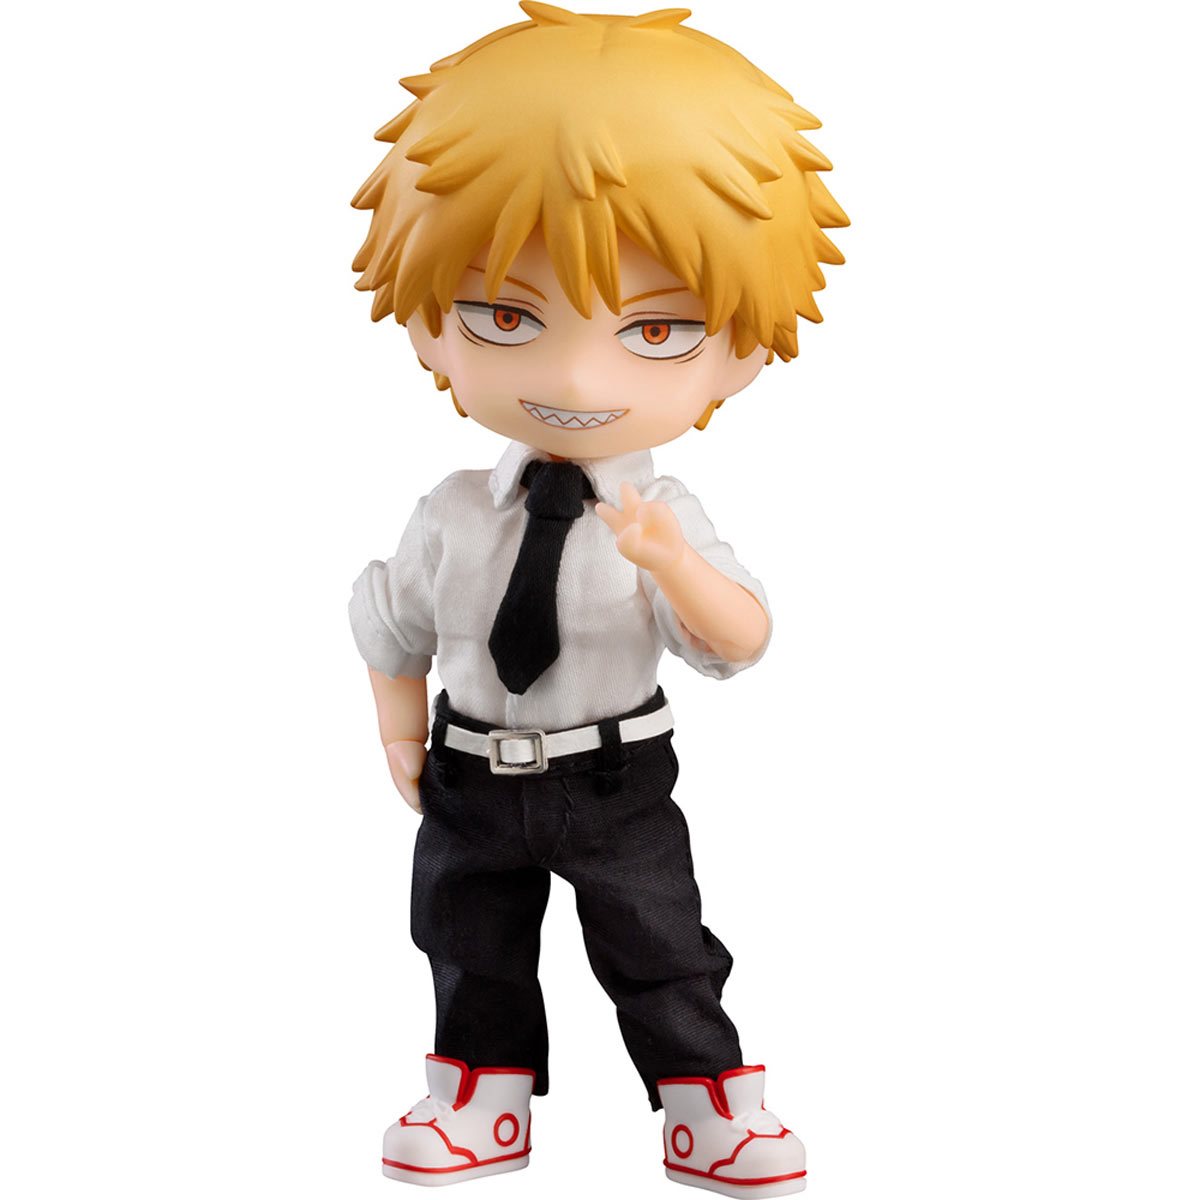 GoodSmile_US on X: From the popular manga series Chainsaw Man comes a  Nendoroid of Denji! All kinds of parts are included to display Nendoroid  Denji in both standard and transformed appearances. Preorders